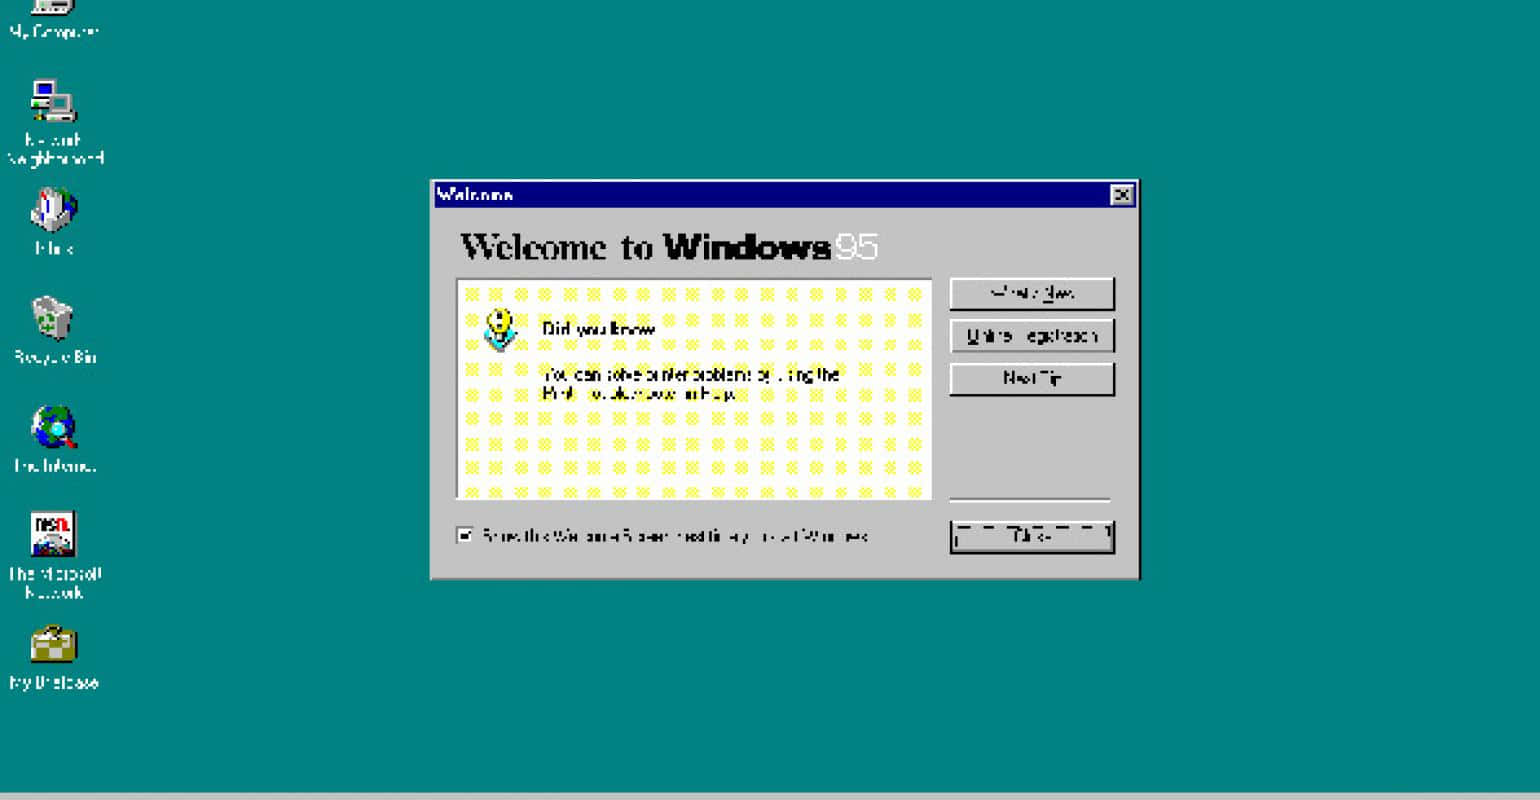 Come Experience the Power of Windows 95